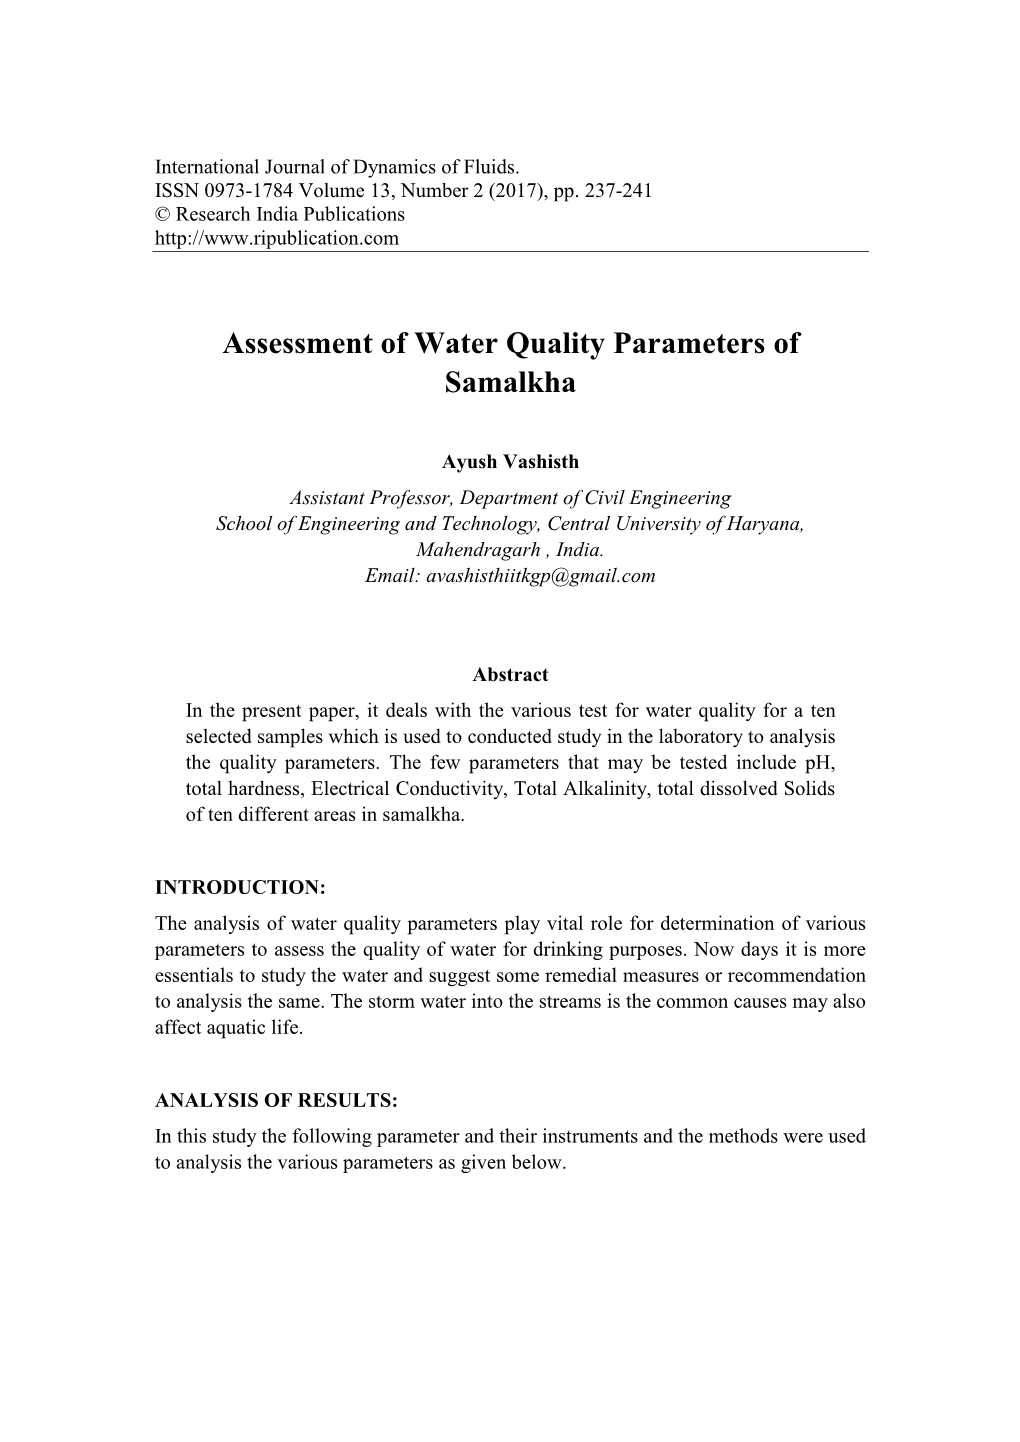 Assessment of Water Quality Parameters of Samalkha